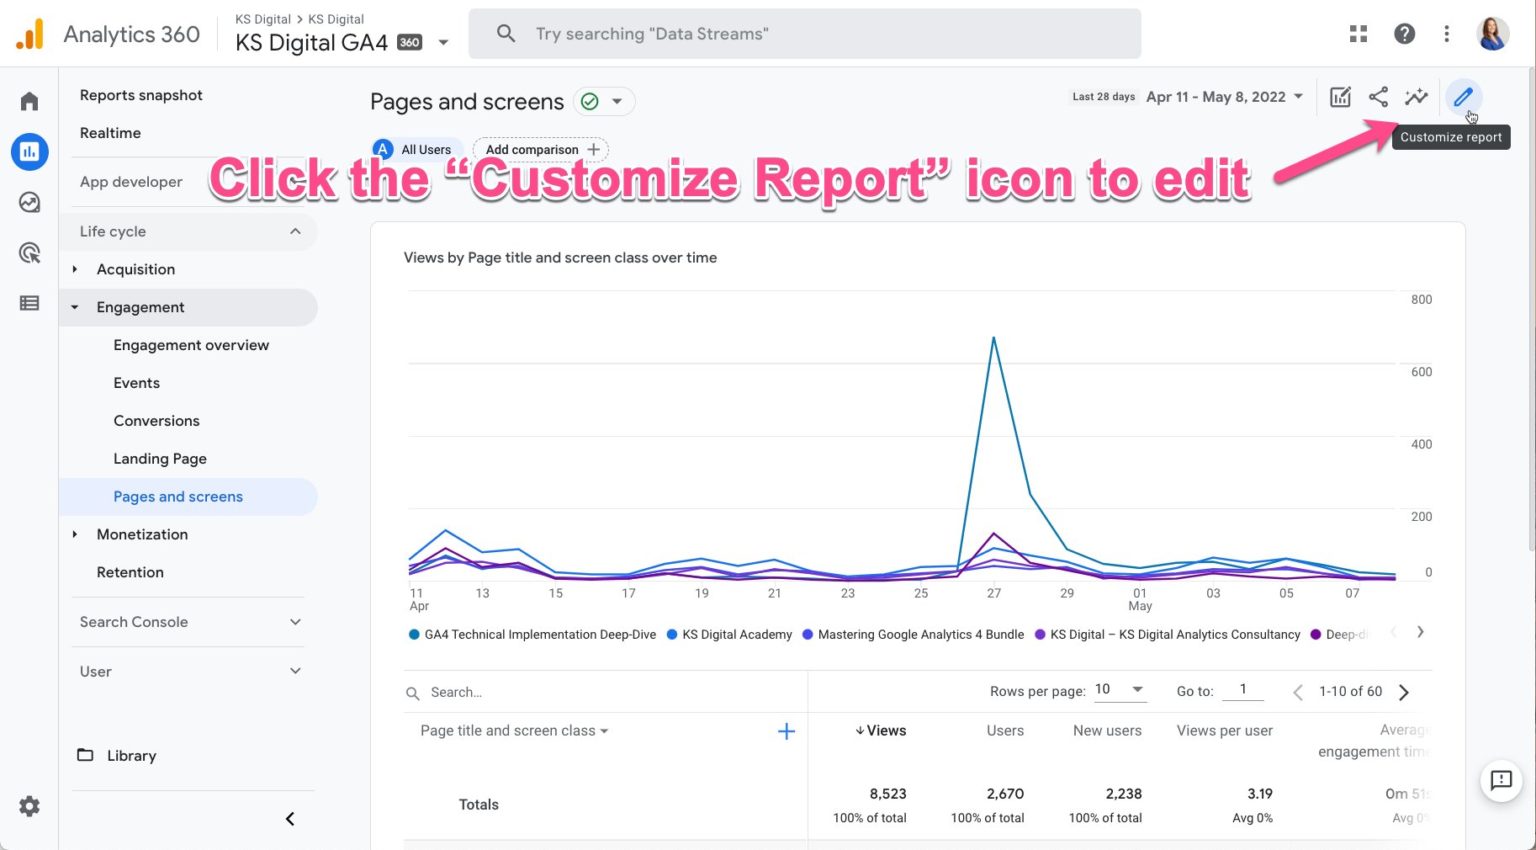 How to make a GA4 landing page report in 10 easy steps